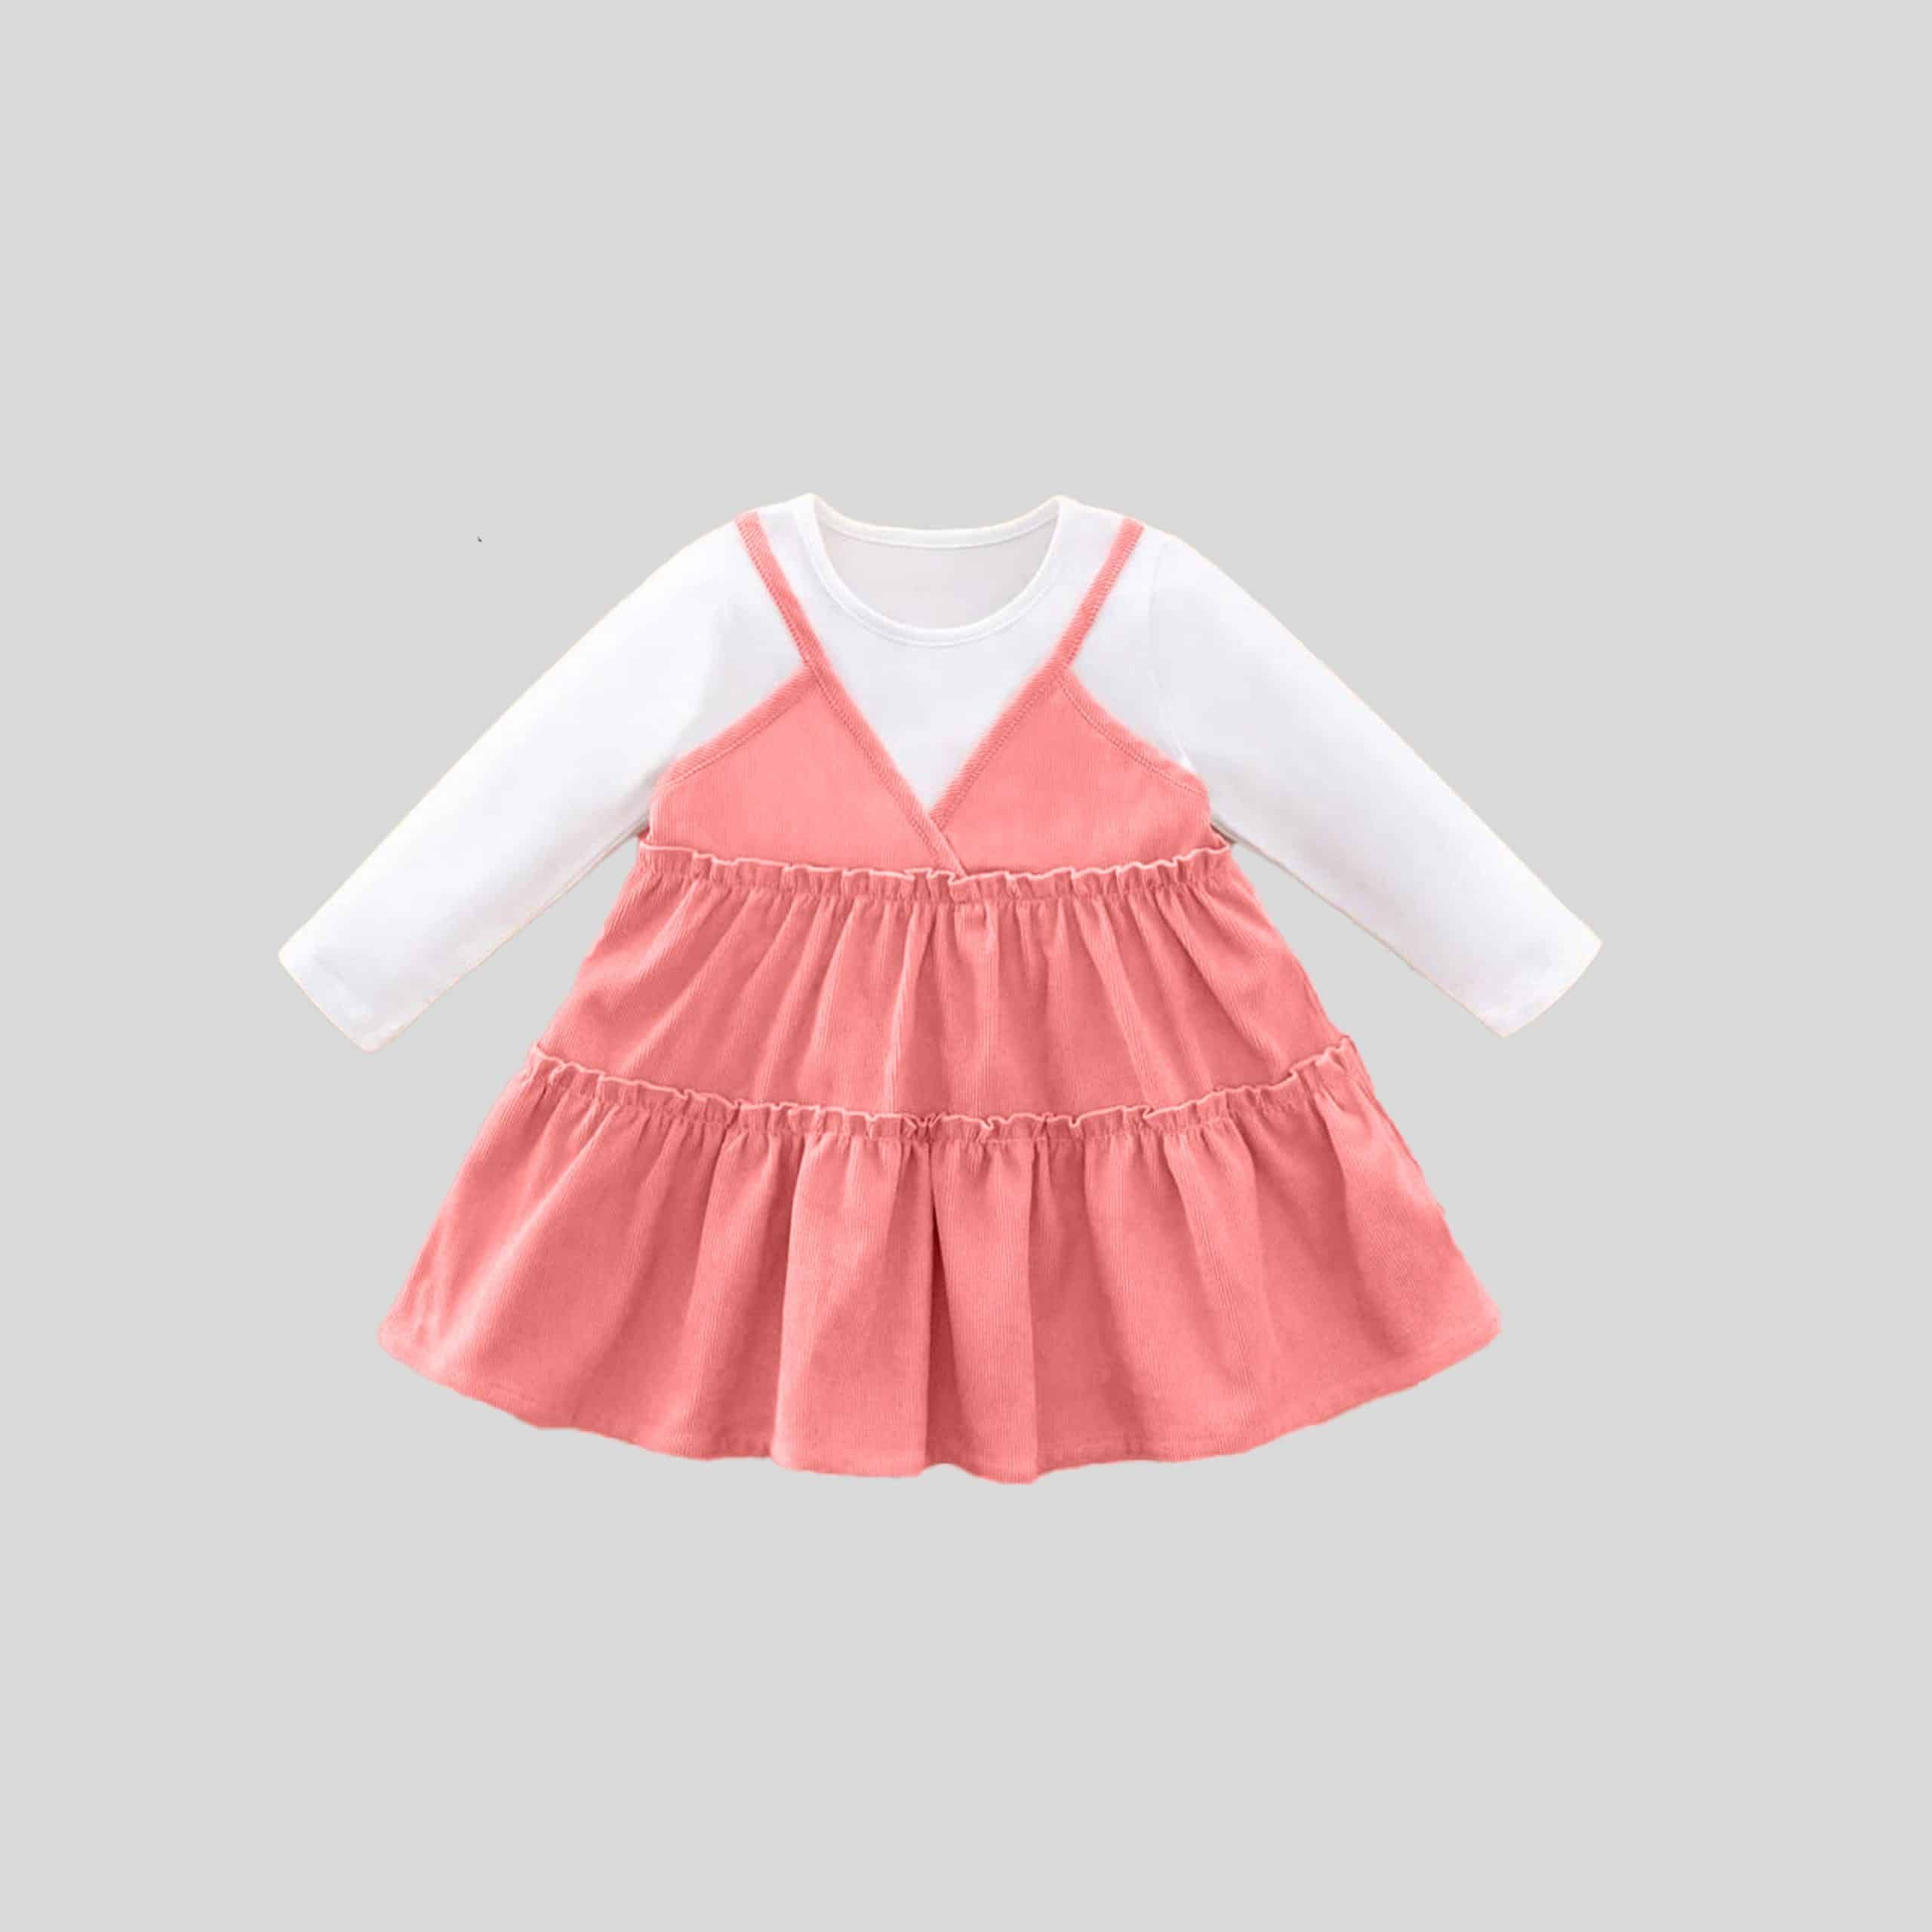 Girls full sleeves white top and pink frilly Dungarees set-RKFCW253